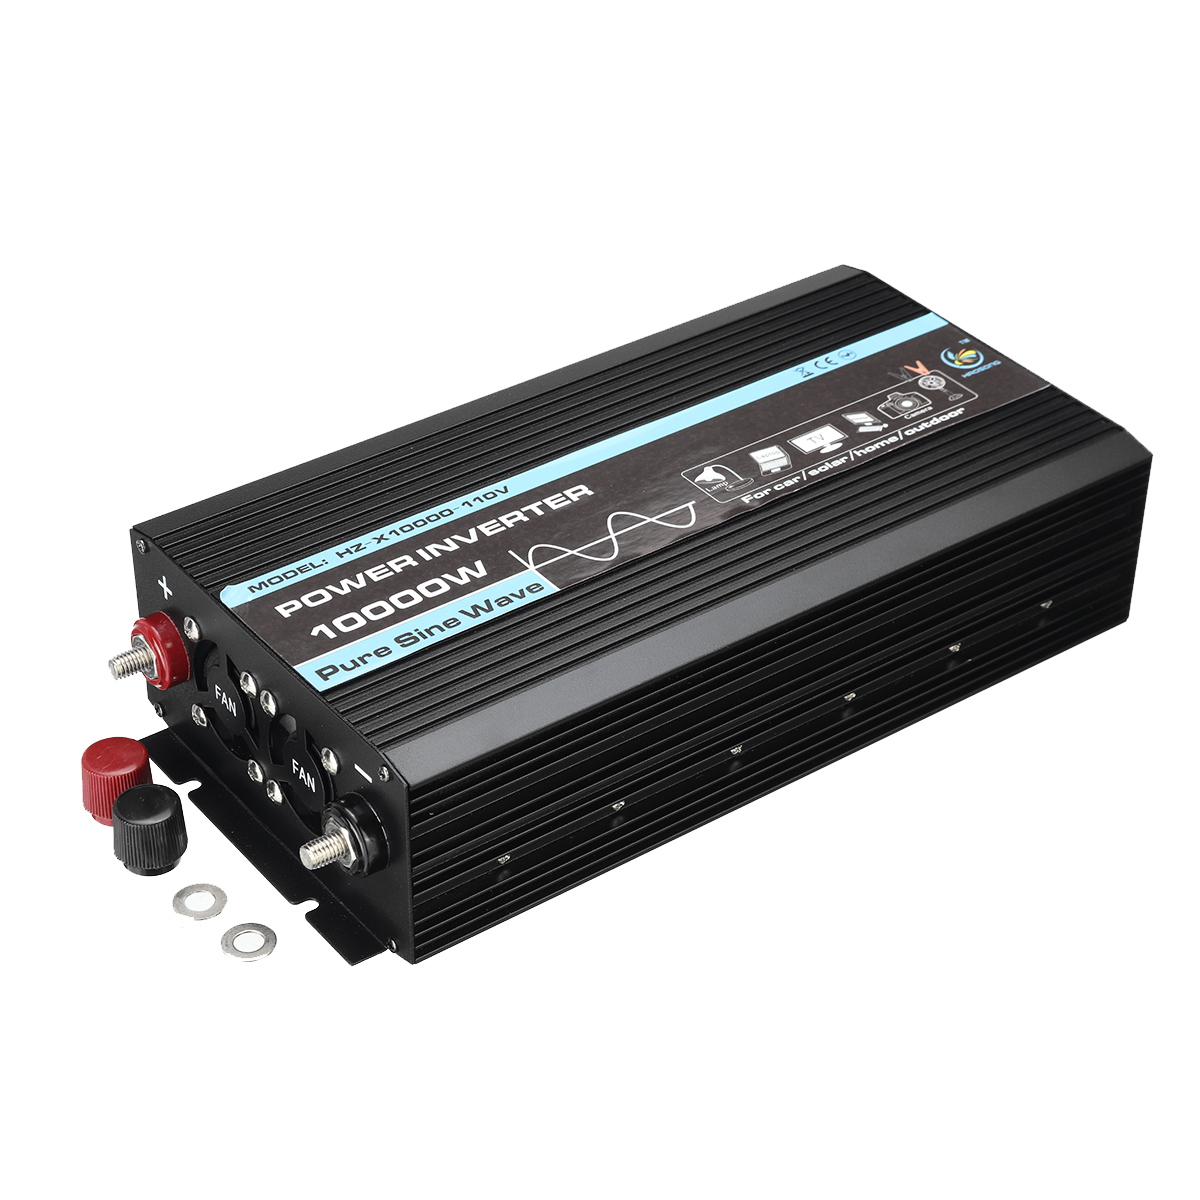 Find Dual Display 3000W Pure Sine Wave Inverter Car Household Power Inverter DC To AC Converter for Sale on Gipsybee.com with cryptocurrencies